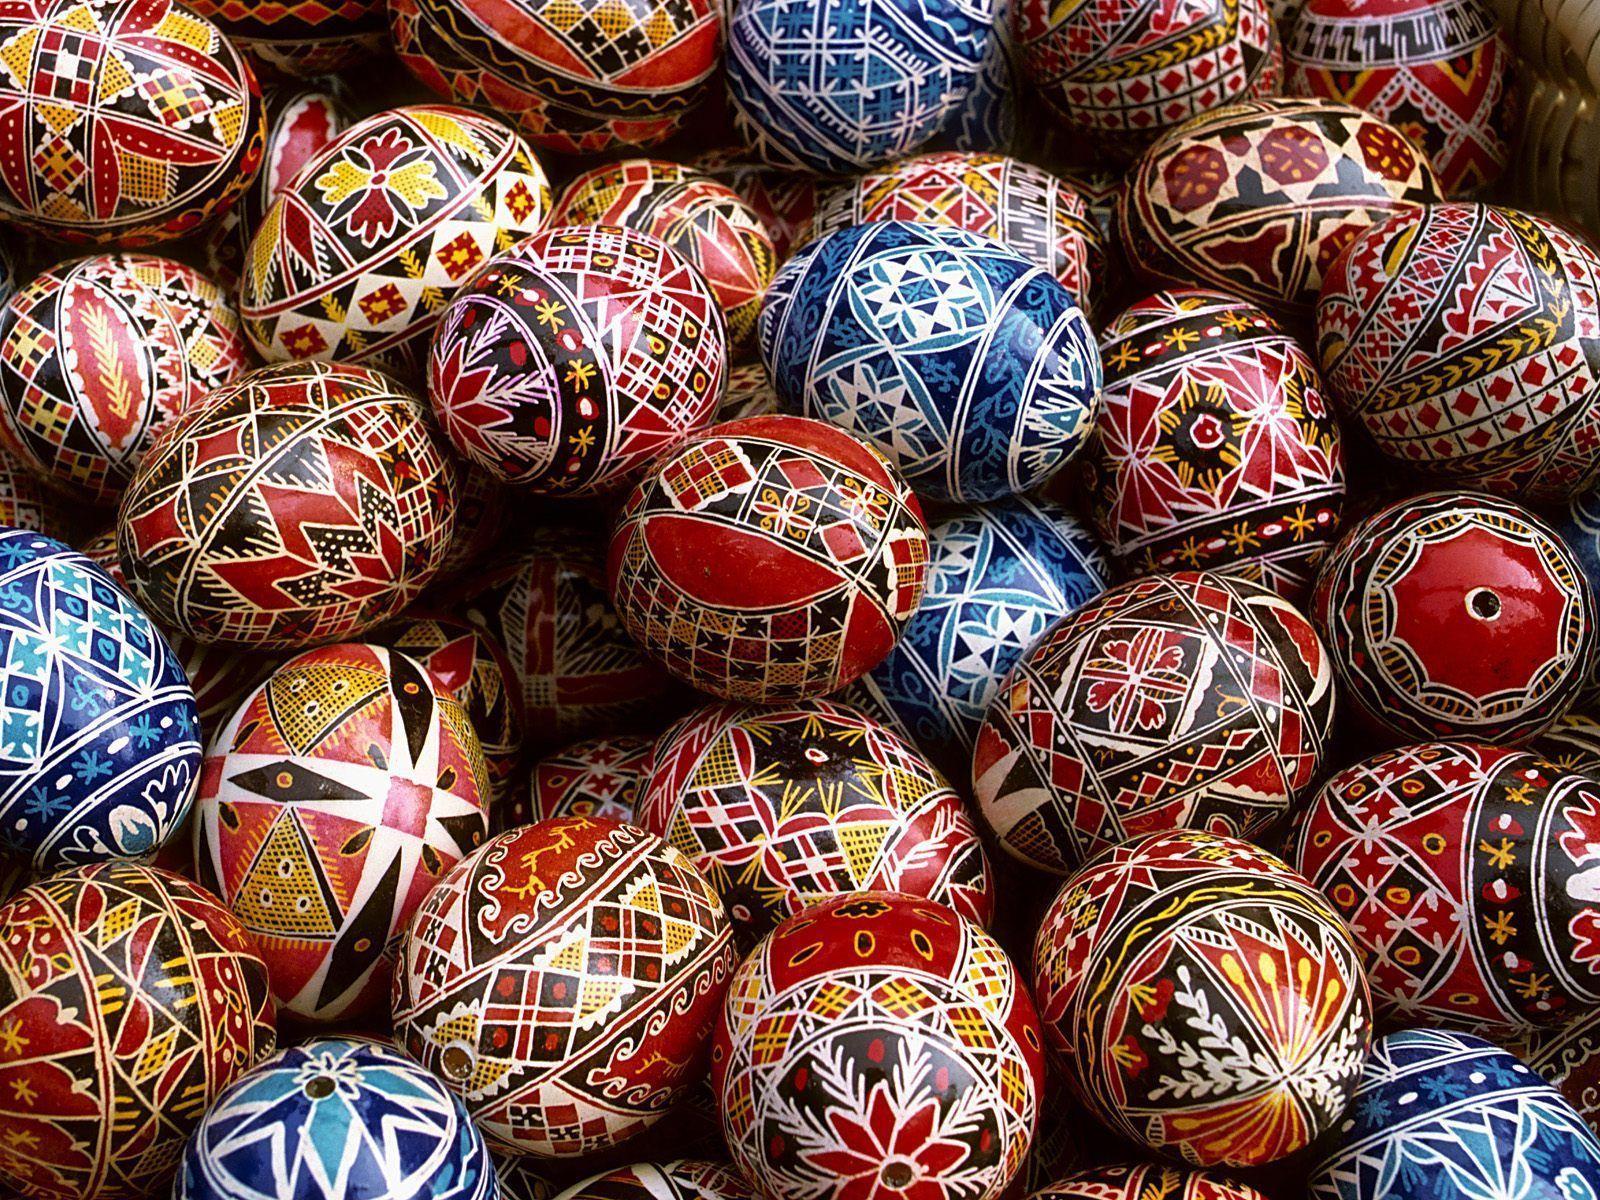 Amazing Easter Eggs wallpaper and image, picture